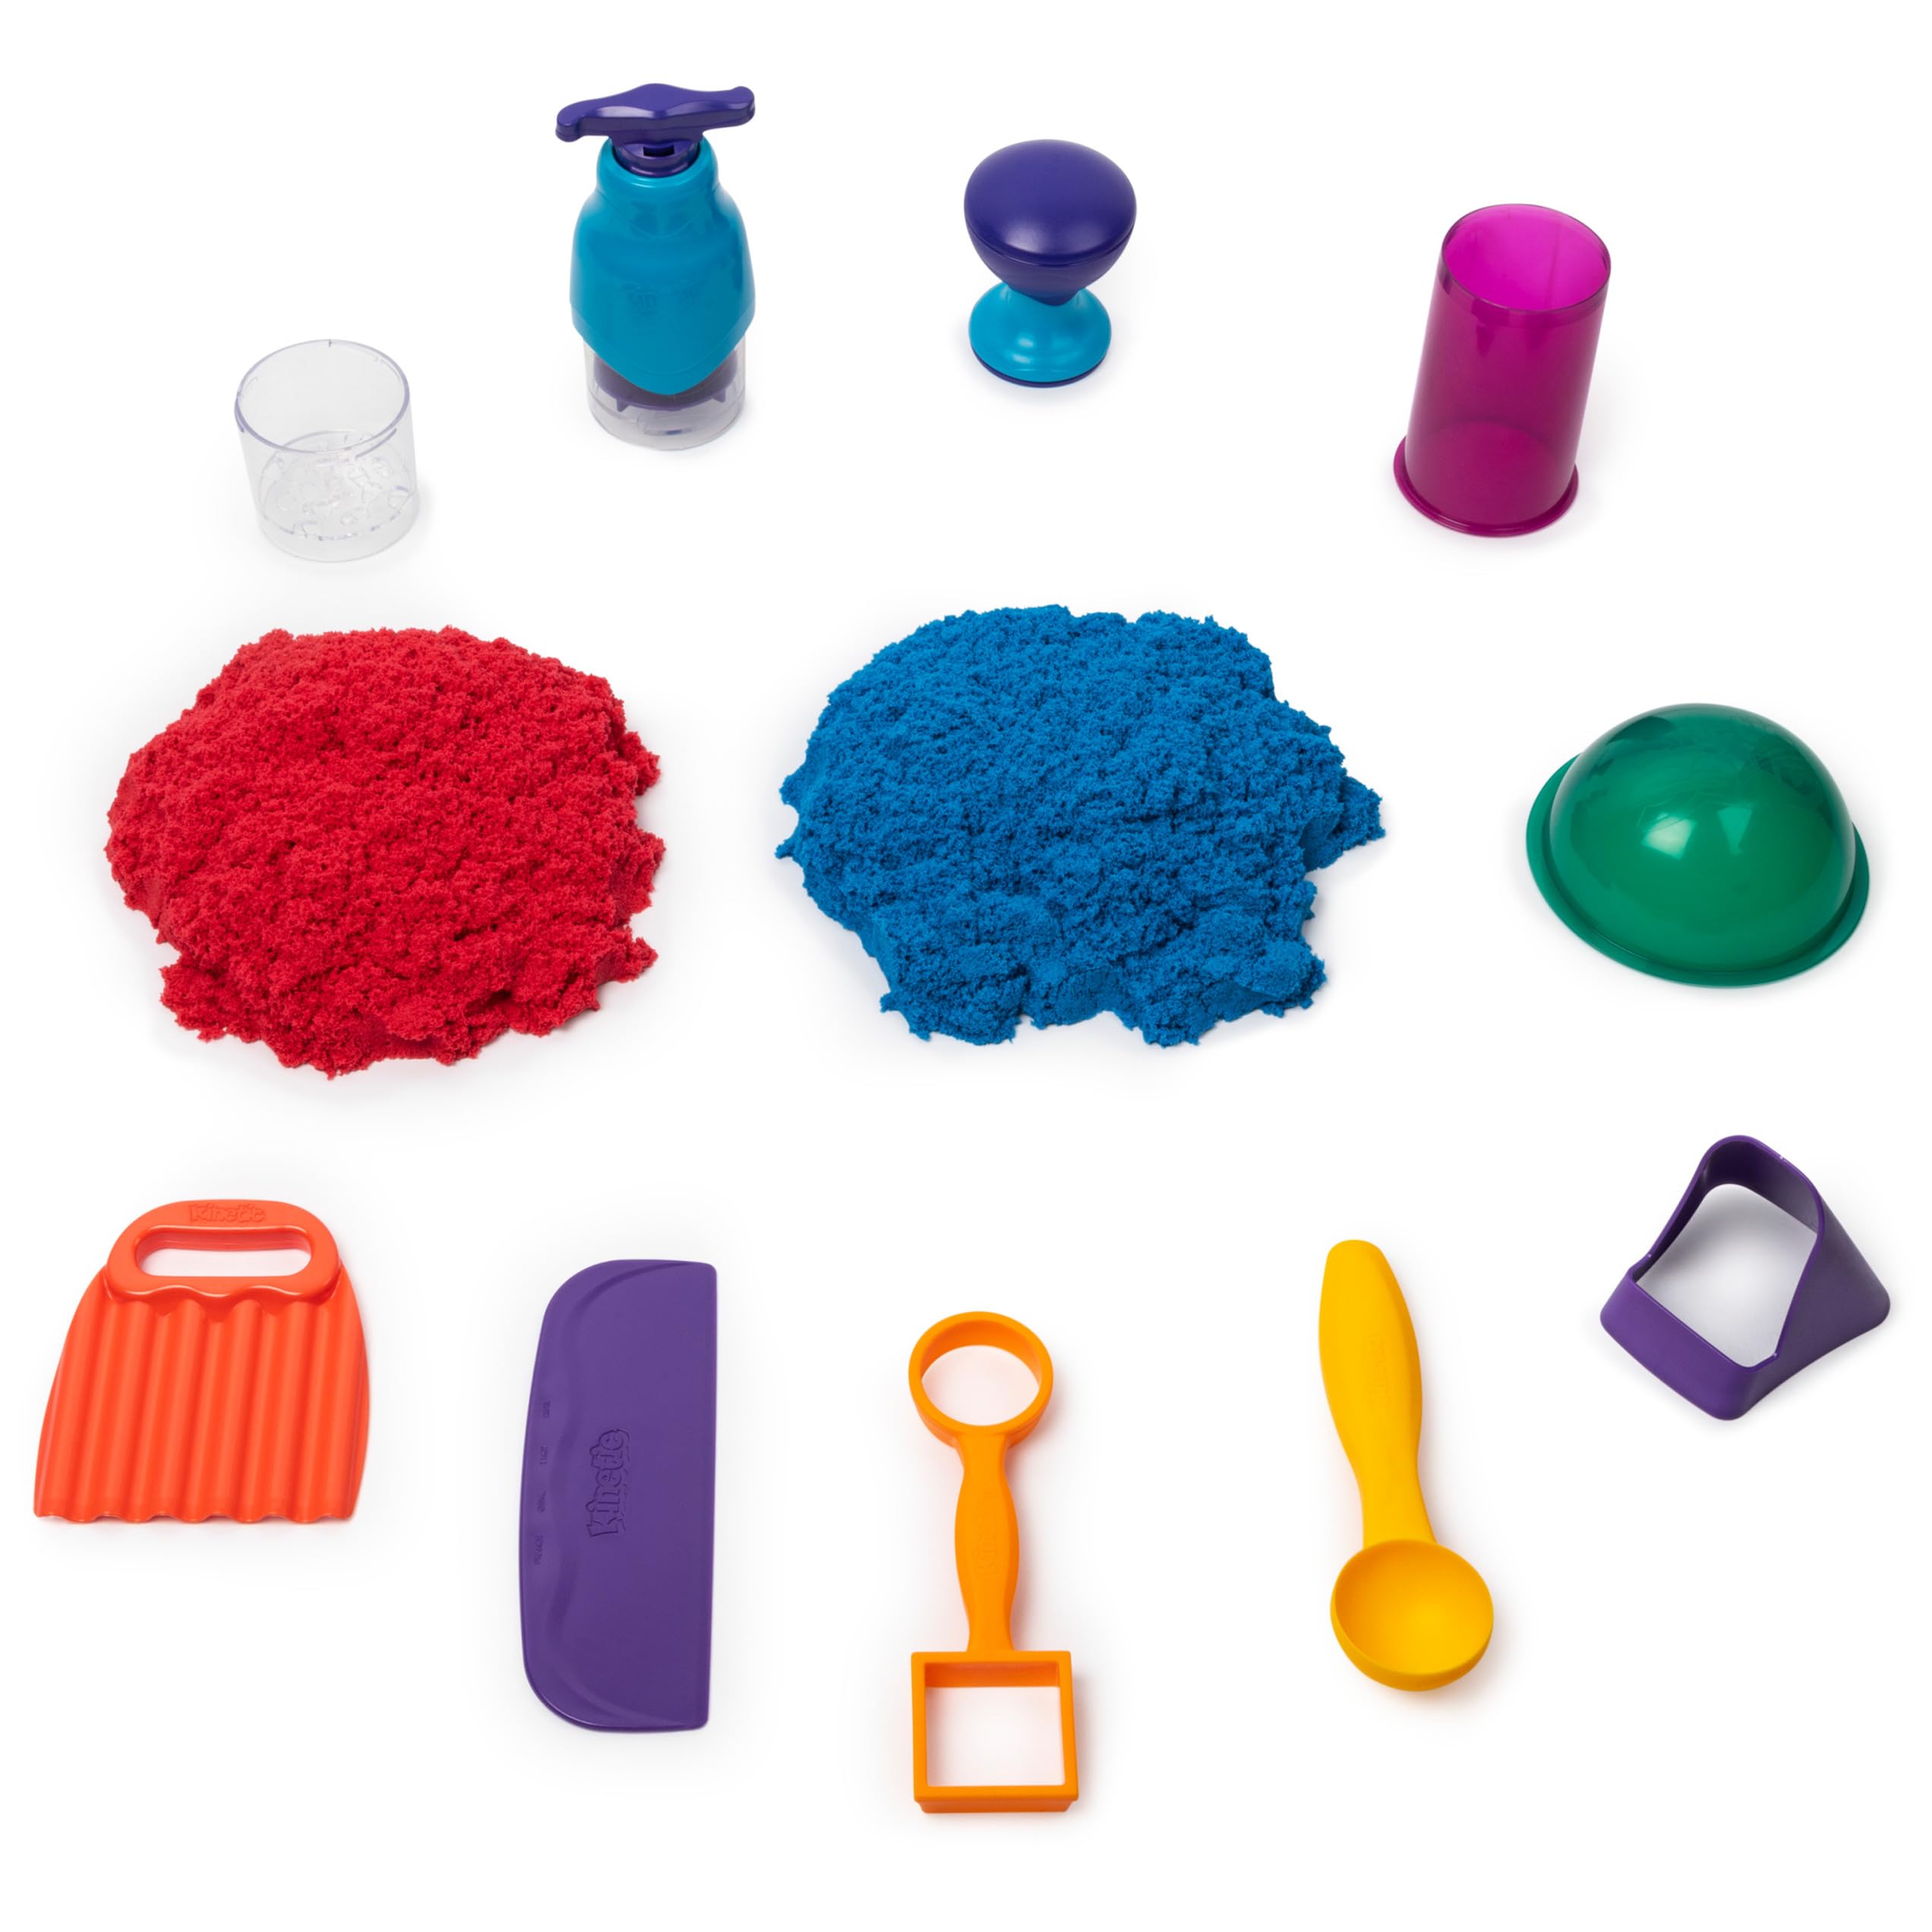 Kinetic Sand, Sandisfying Set with 2Lbs of Sand and 10 Tools, Play Sand Sensory Toys for Kids Ages 3 and Up